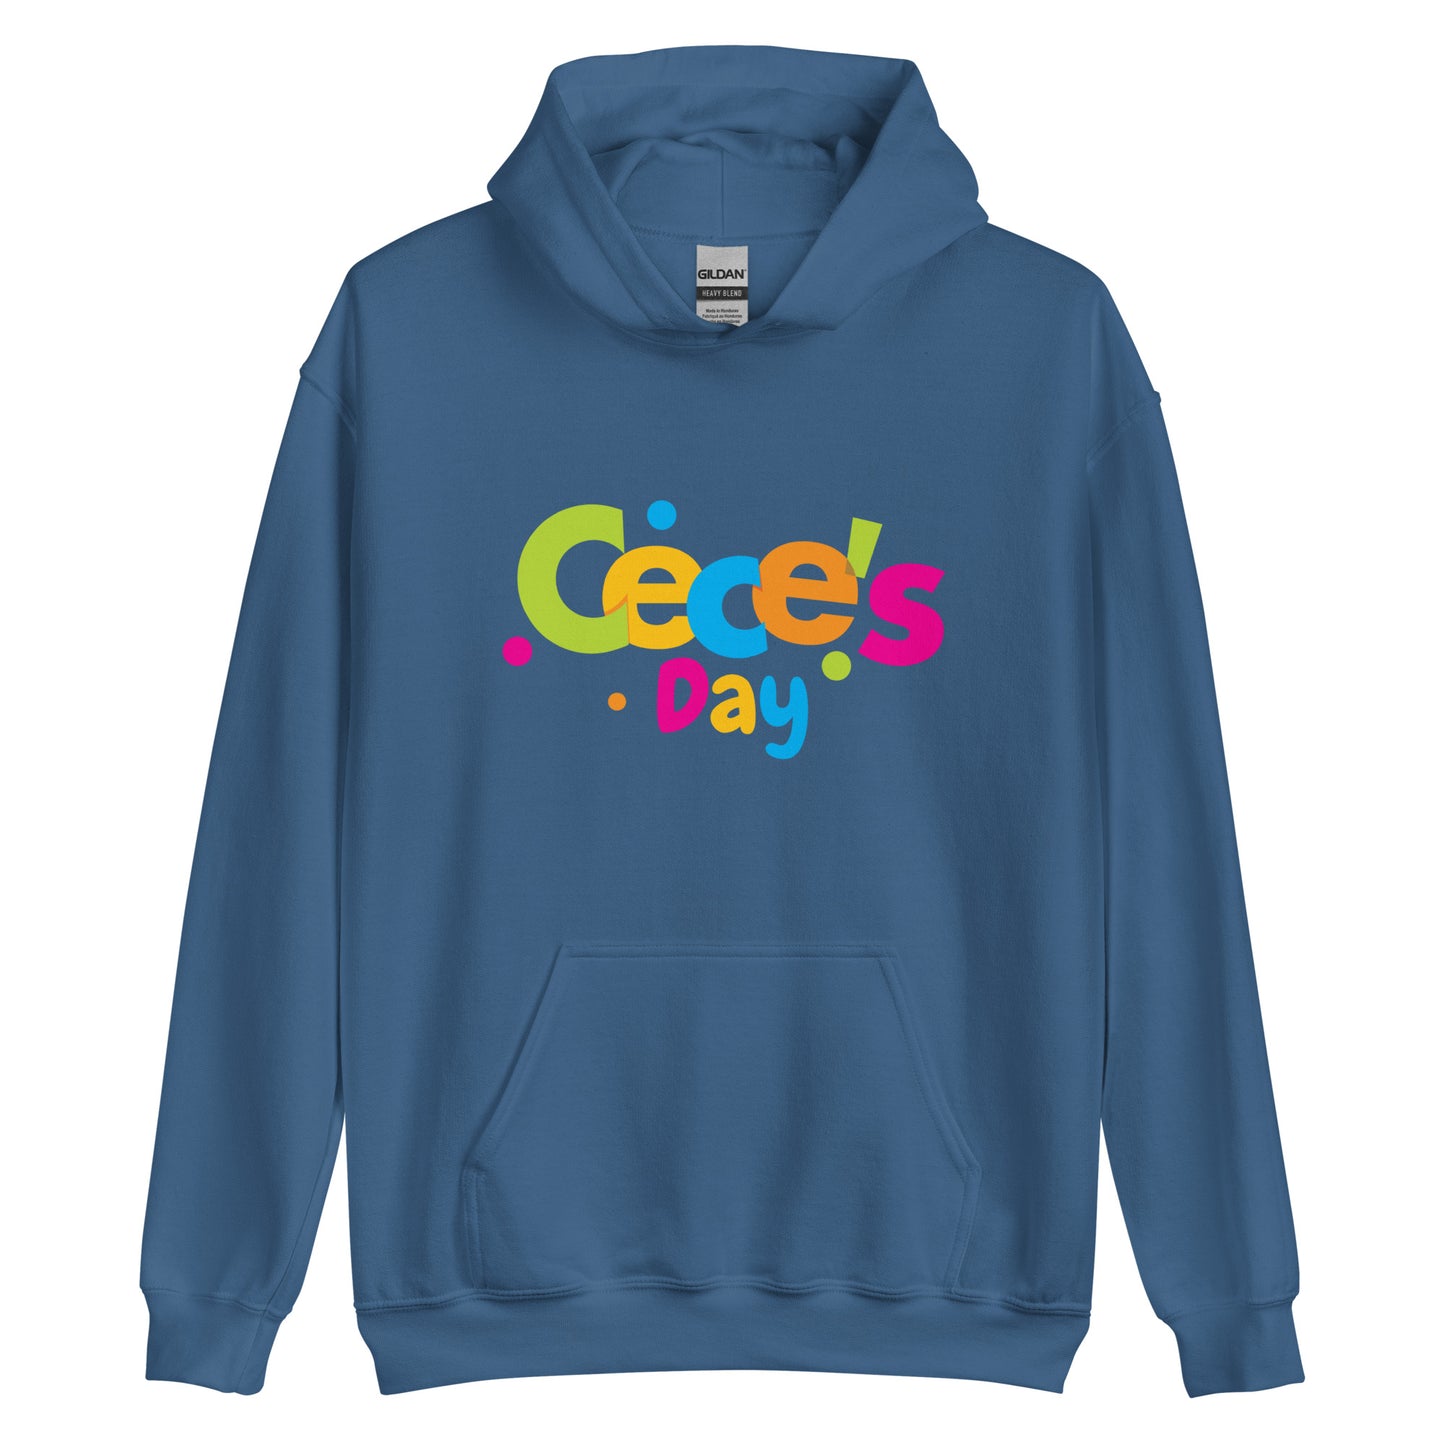 Cece's Day Adult Unisex Hoodie